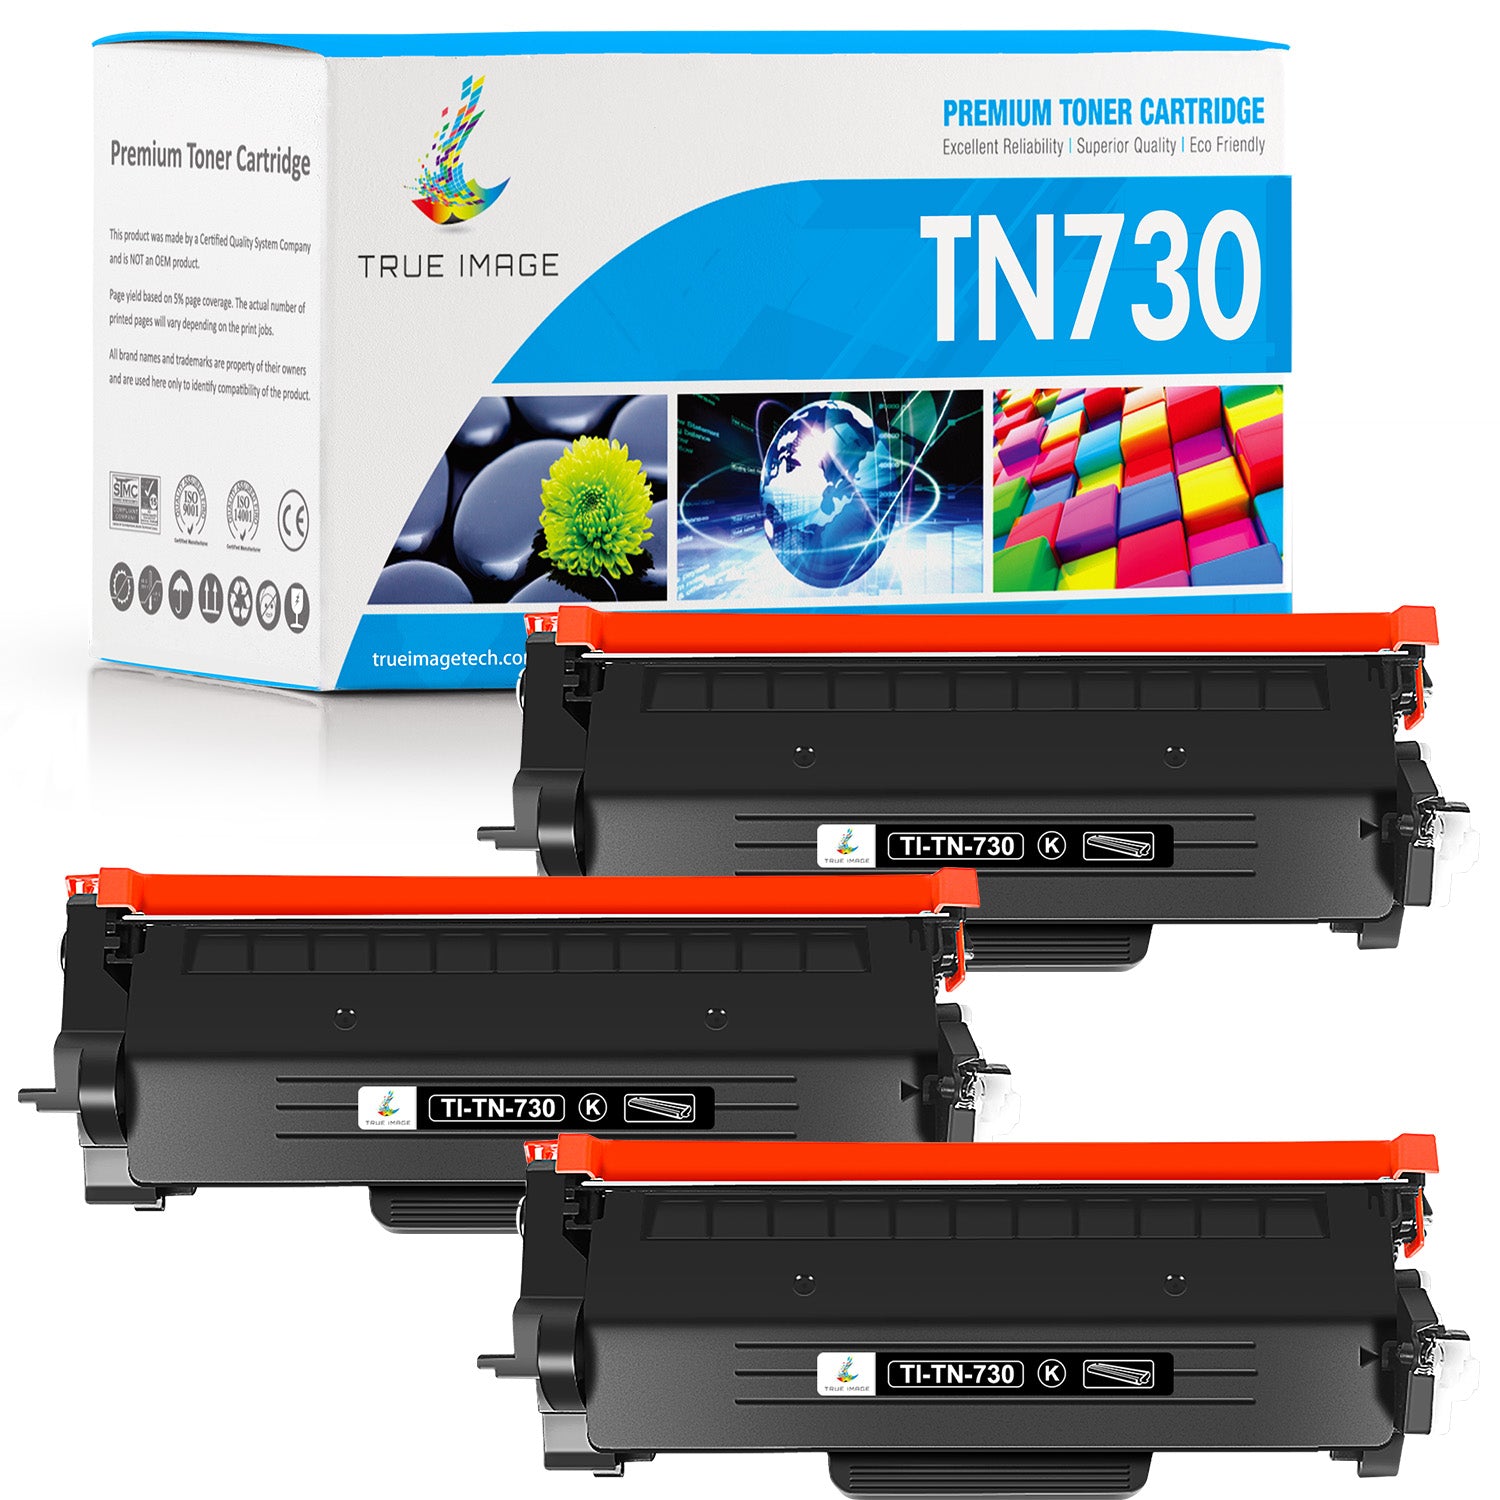 UOTYUE High Yields 3,000 Pages TN730 Toner Replacement for India